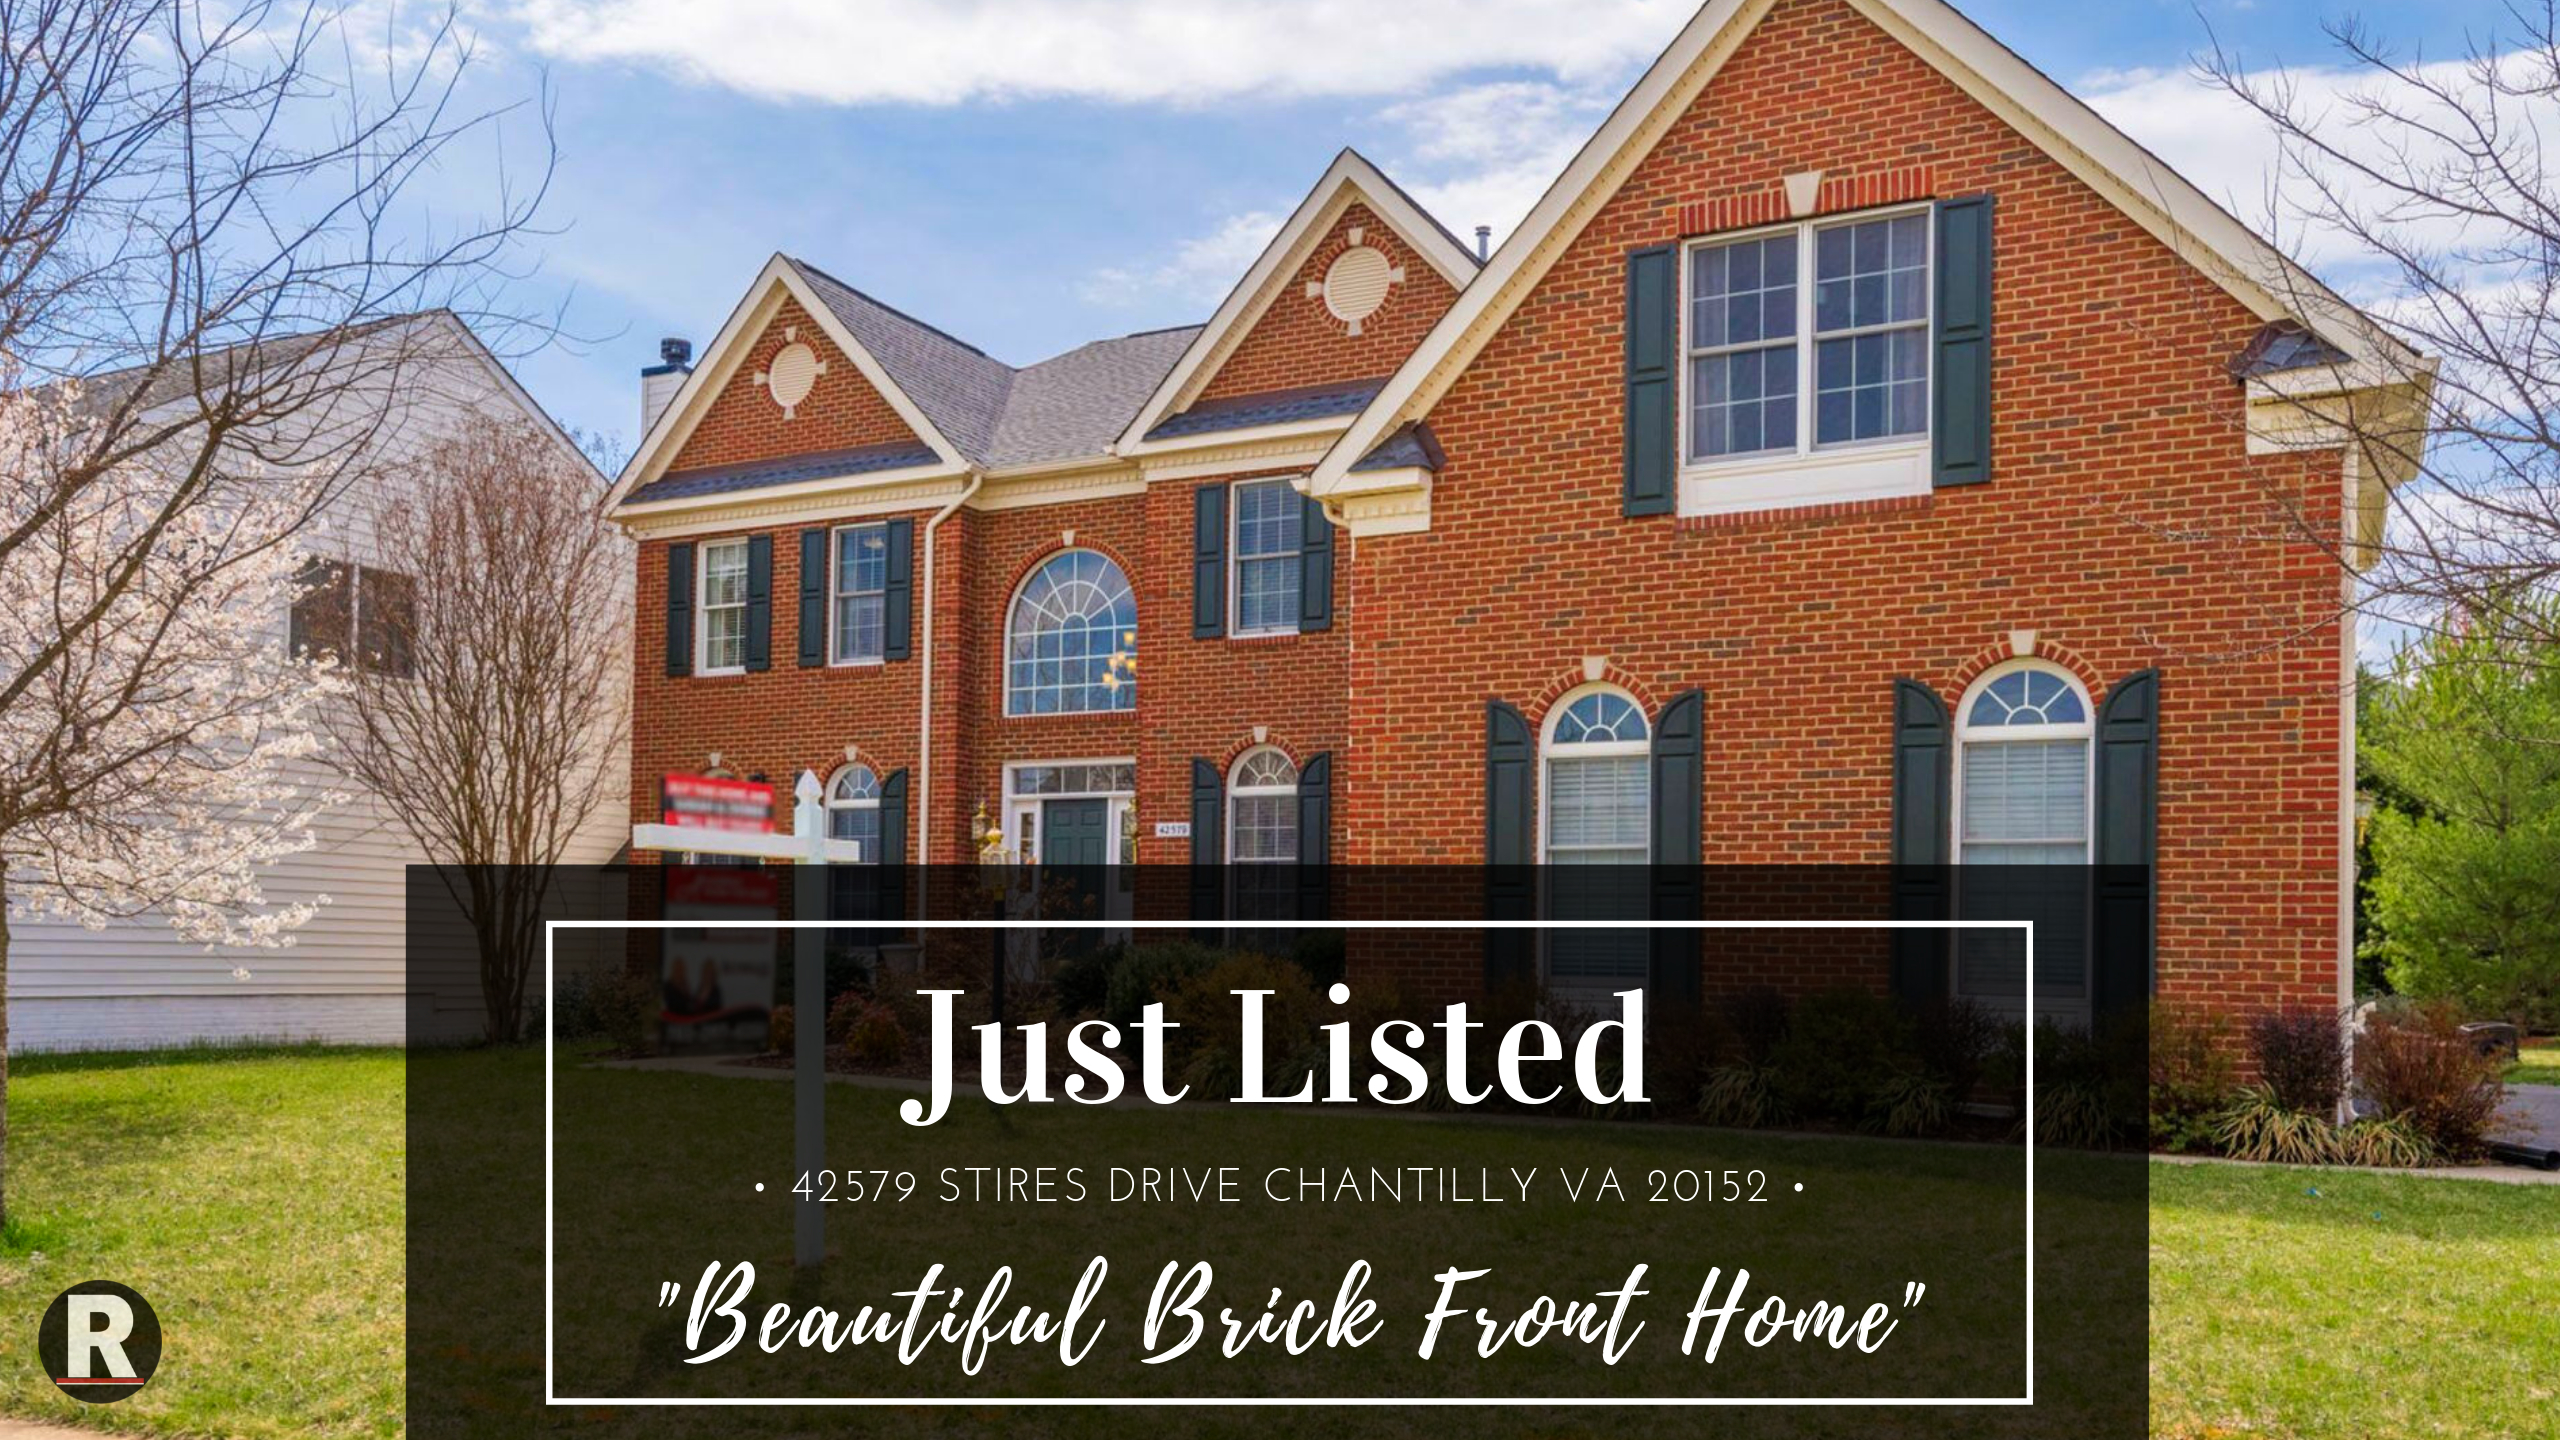 Just Listed! 42579 Stires Drive Chantilly VA 20152